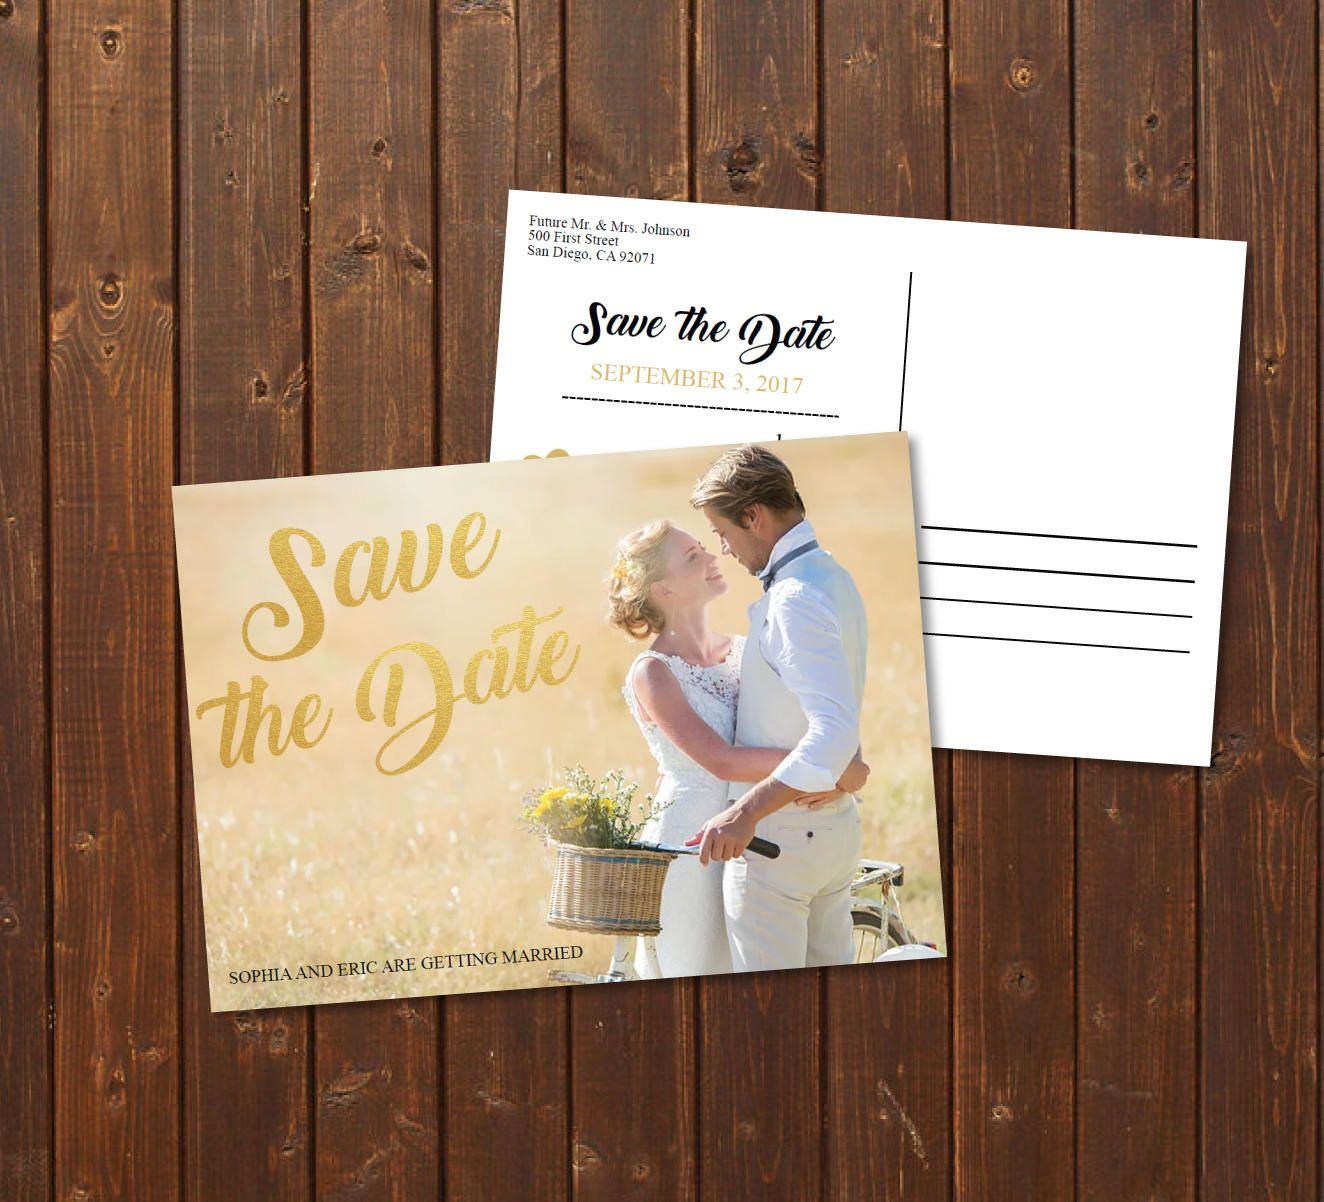 Save The Date Calendar Templatesave The Date Postcard for Please Mark Your Calendar And Save The Date